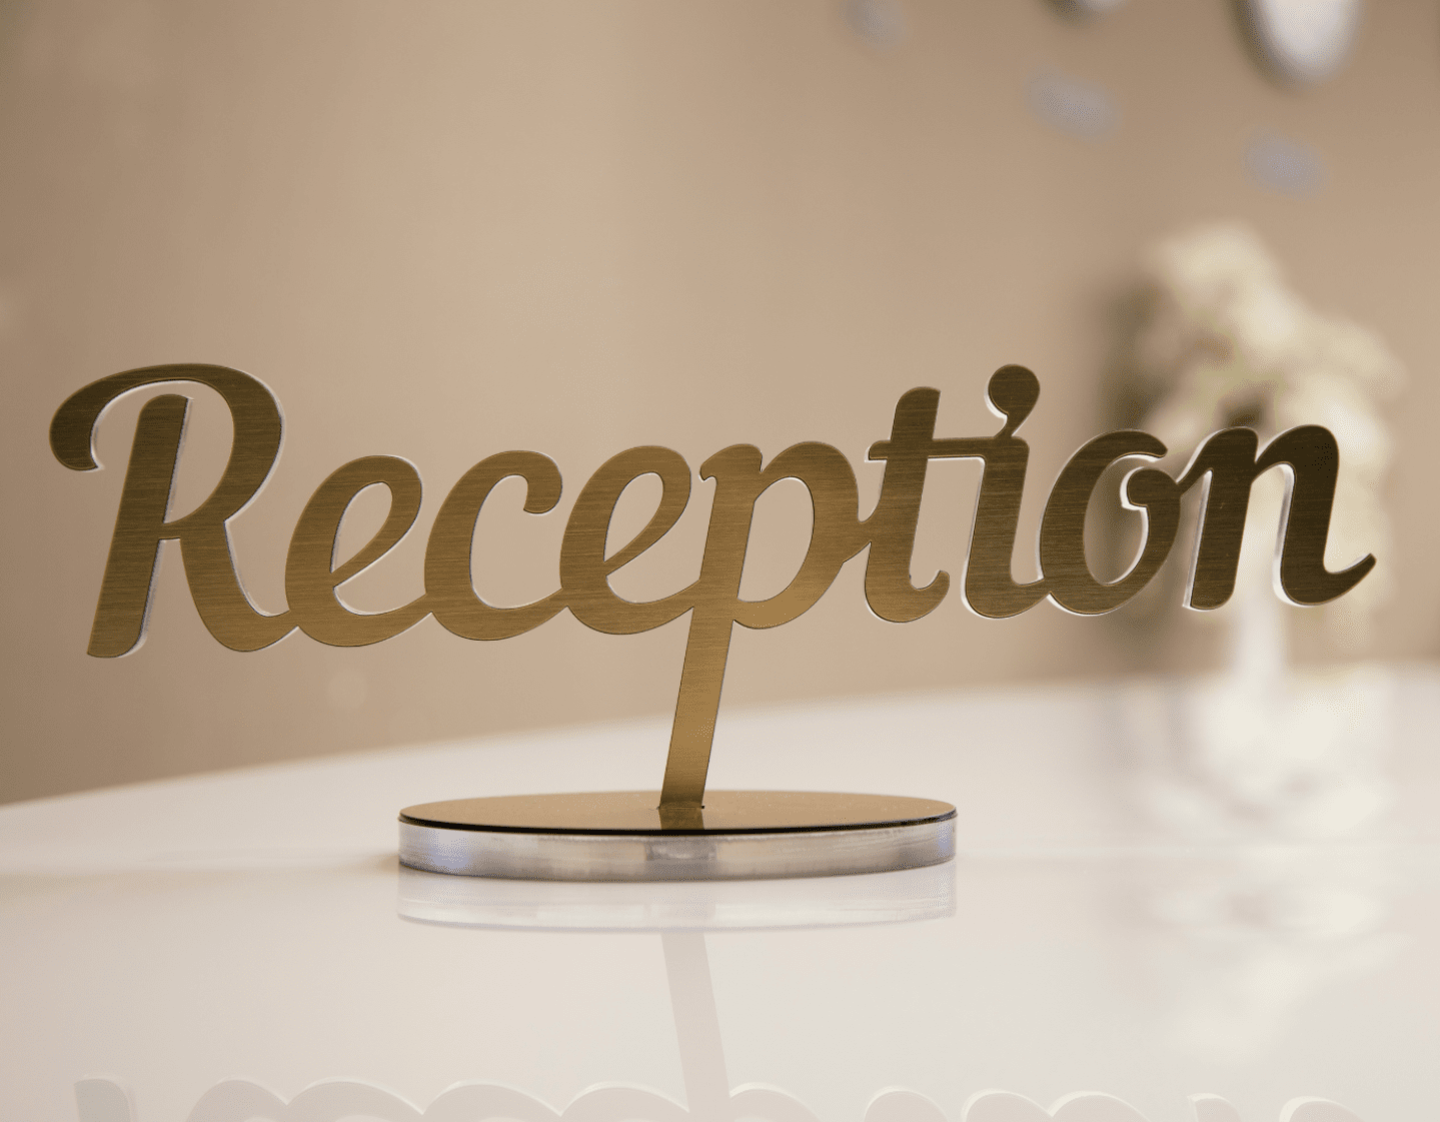 A metal reception sign on a desk